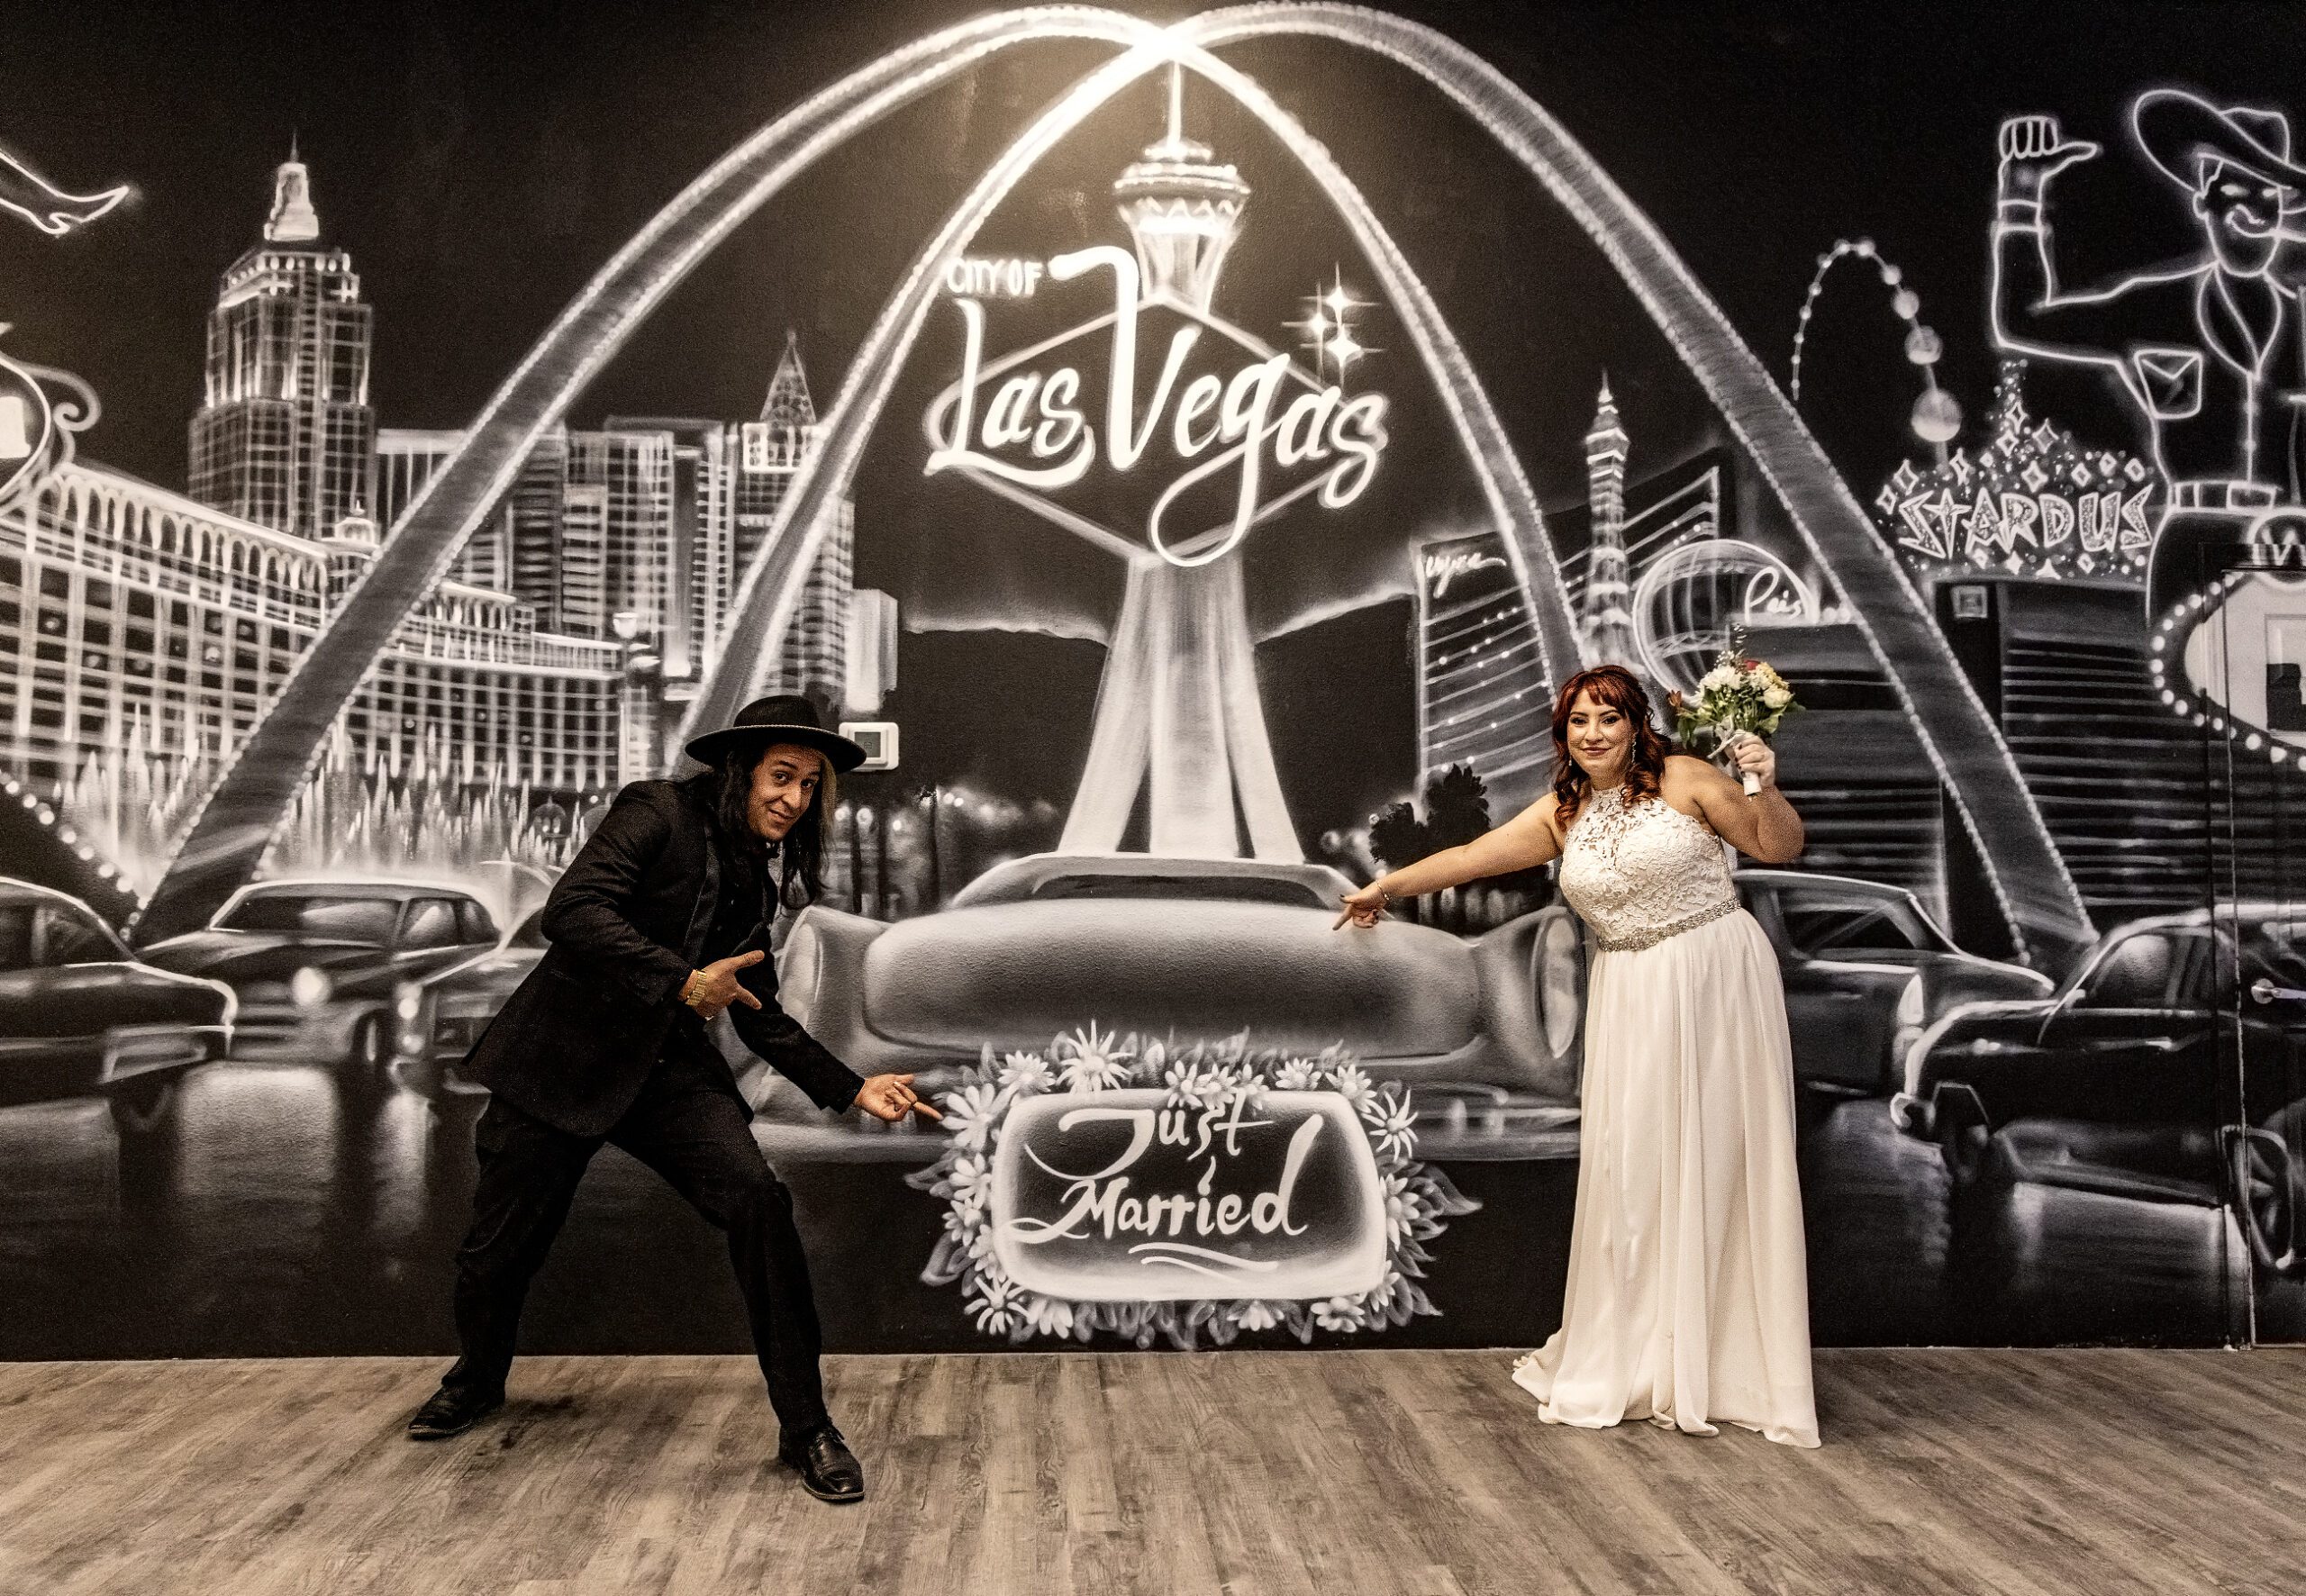 A newlywed couple celebrates in front of a Vegas chapel-themed mural, striking playful poses with the bride holding a bouquet.